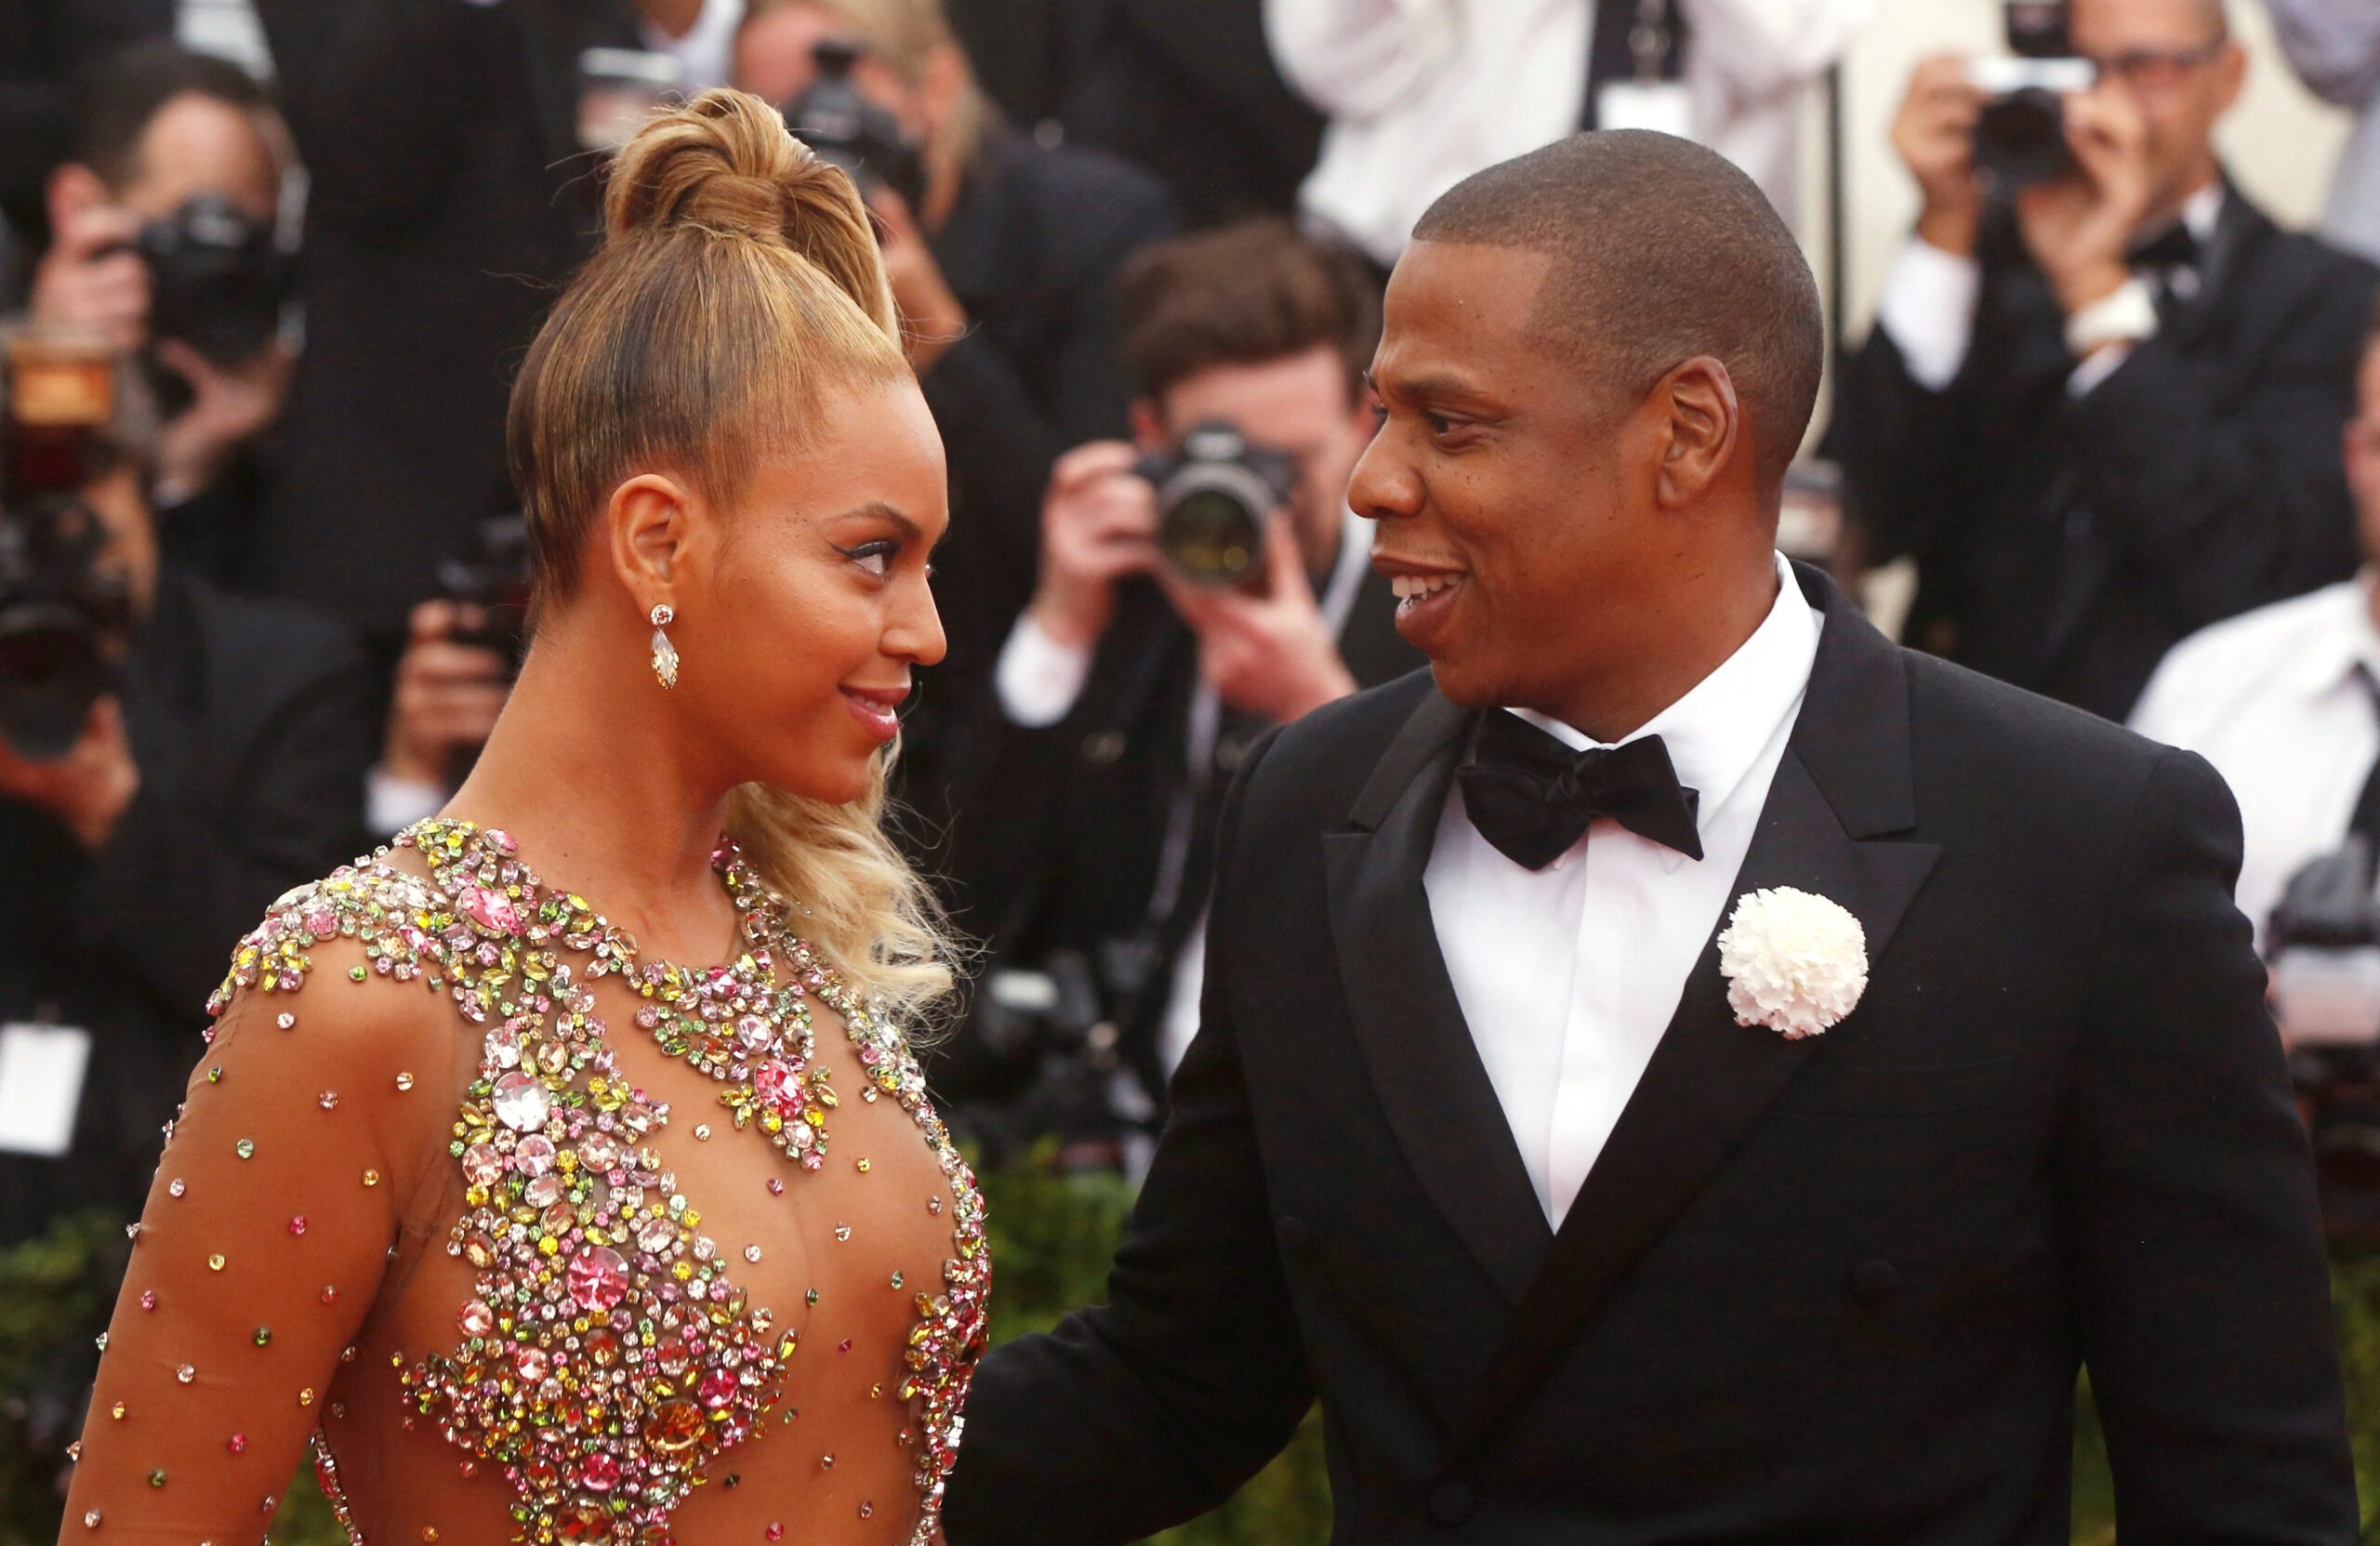 Beyonce ties Jay-Z as most nominated artist in Grammy history